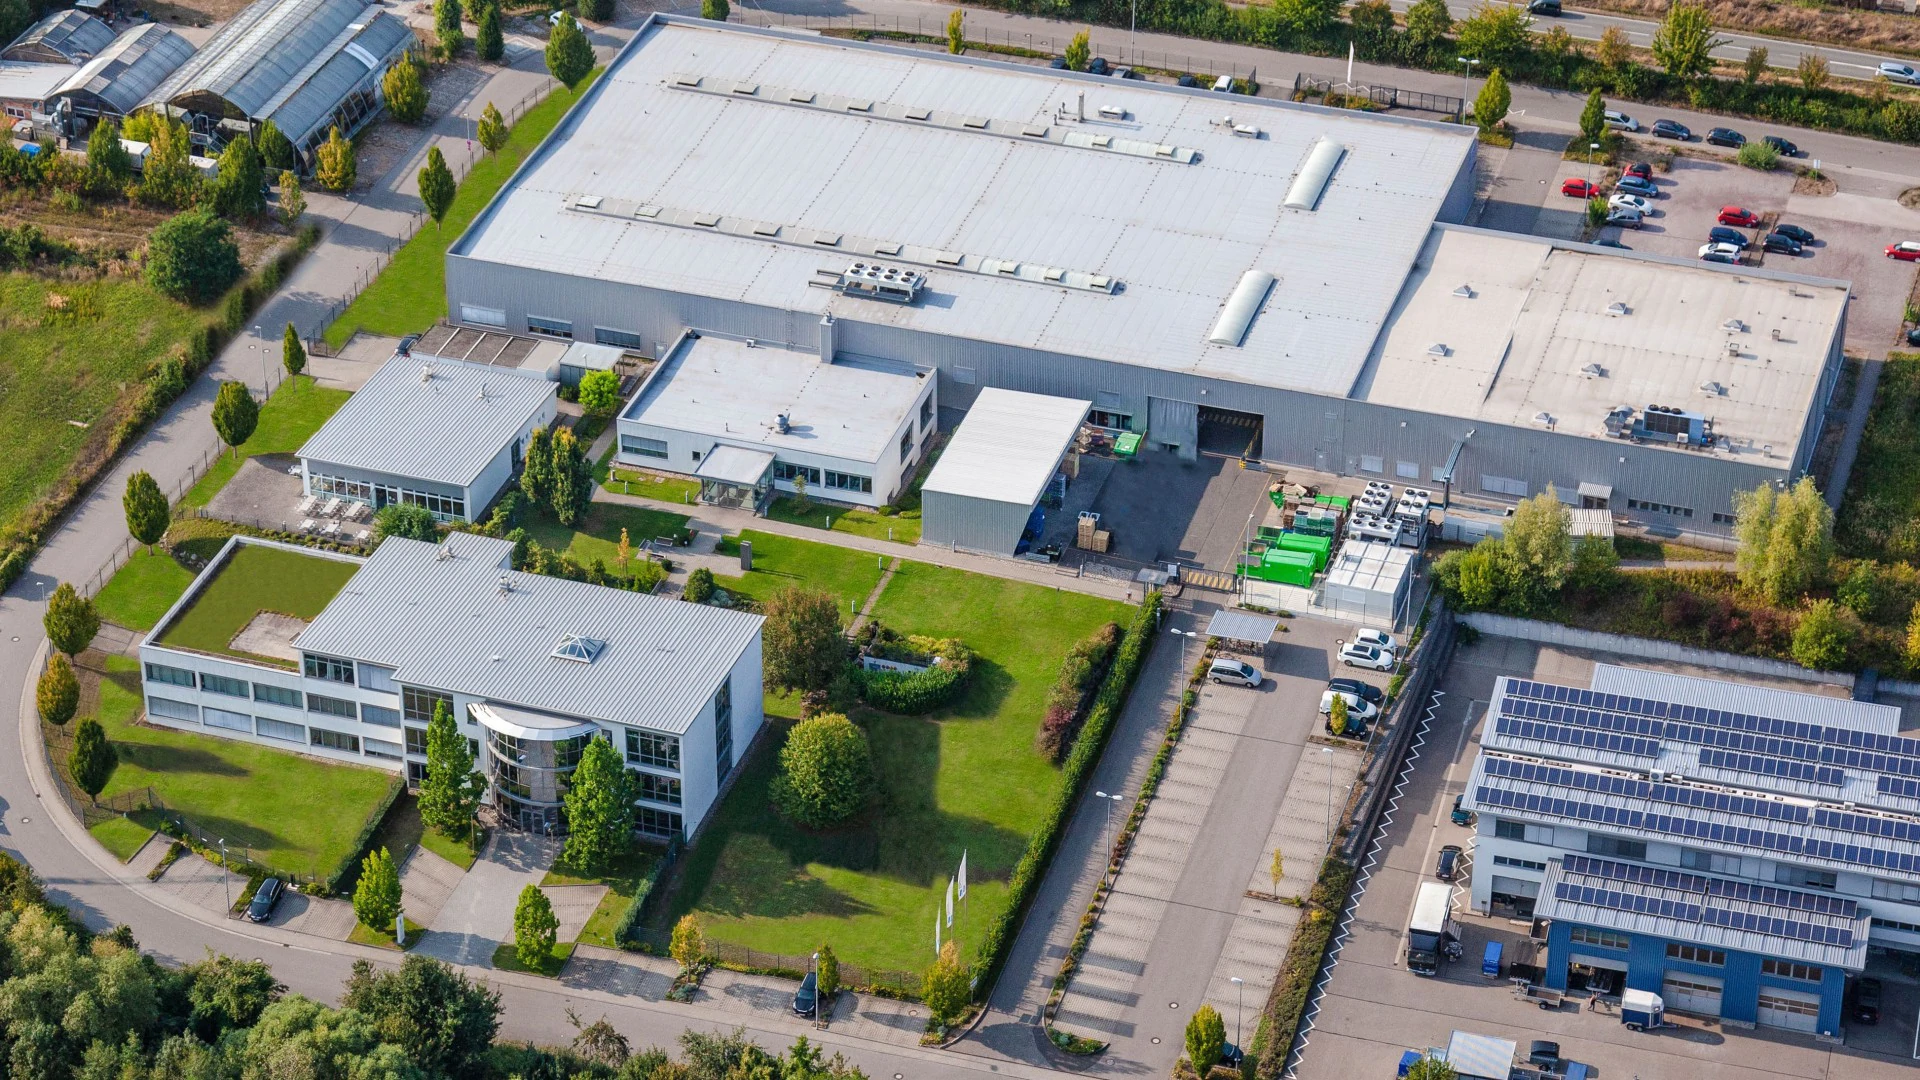 Around 19,000 articles are stored at the Herxheim location. In the past, the customer's material requirements planning was mainly characterized by a lack of transparency in day-to-day business.